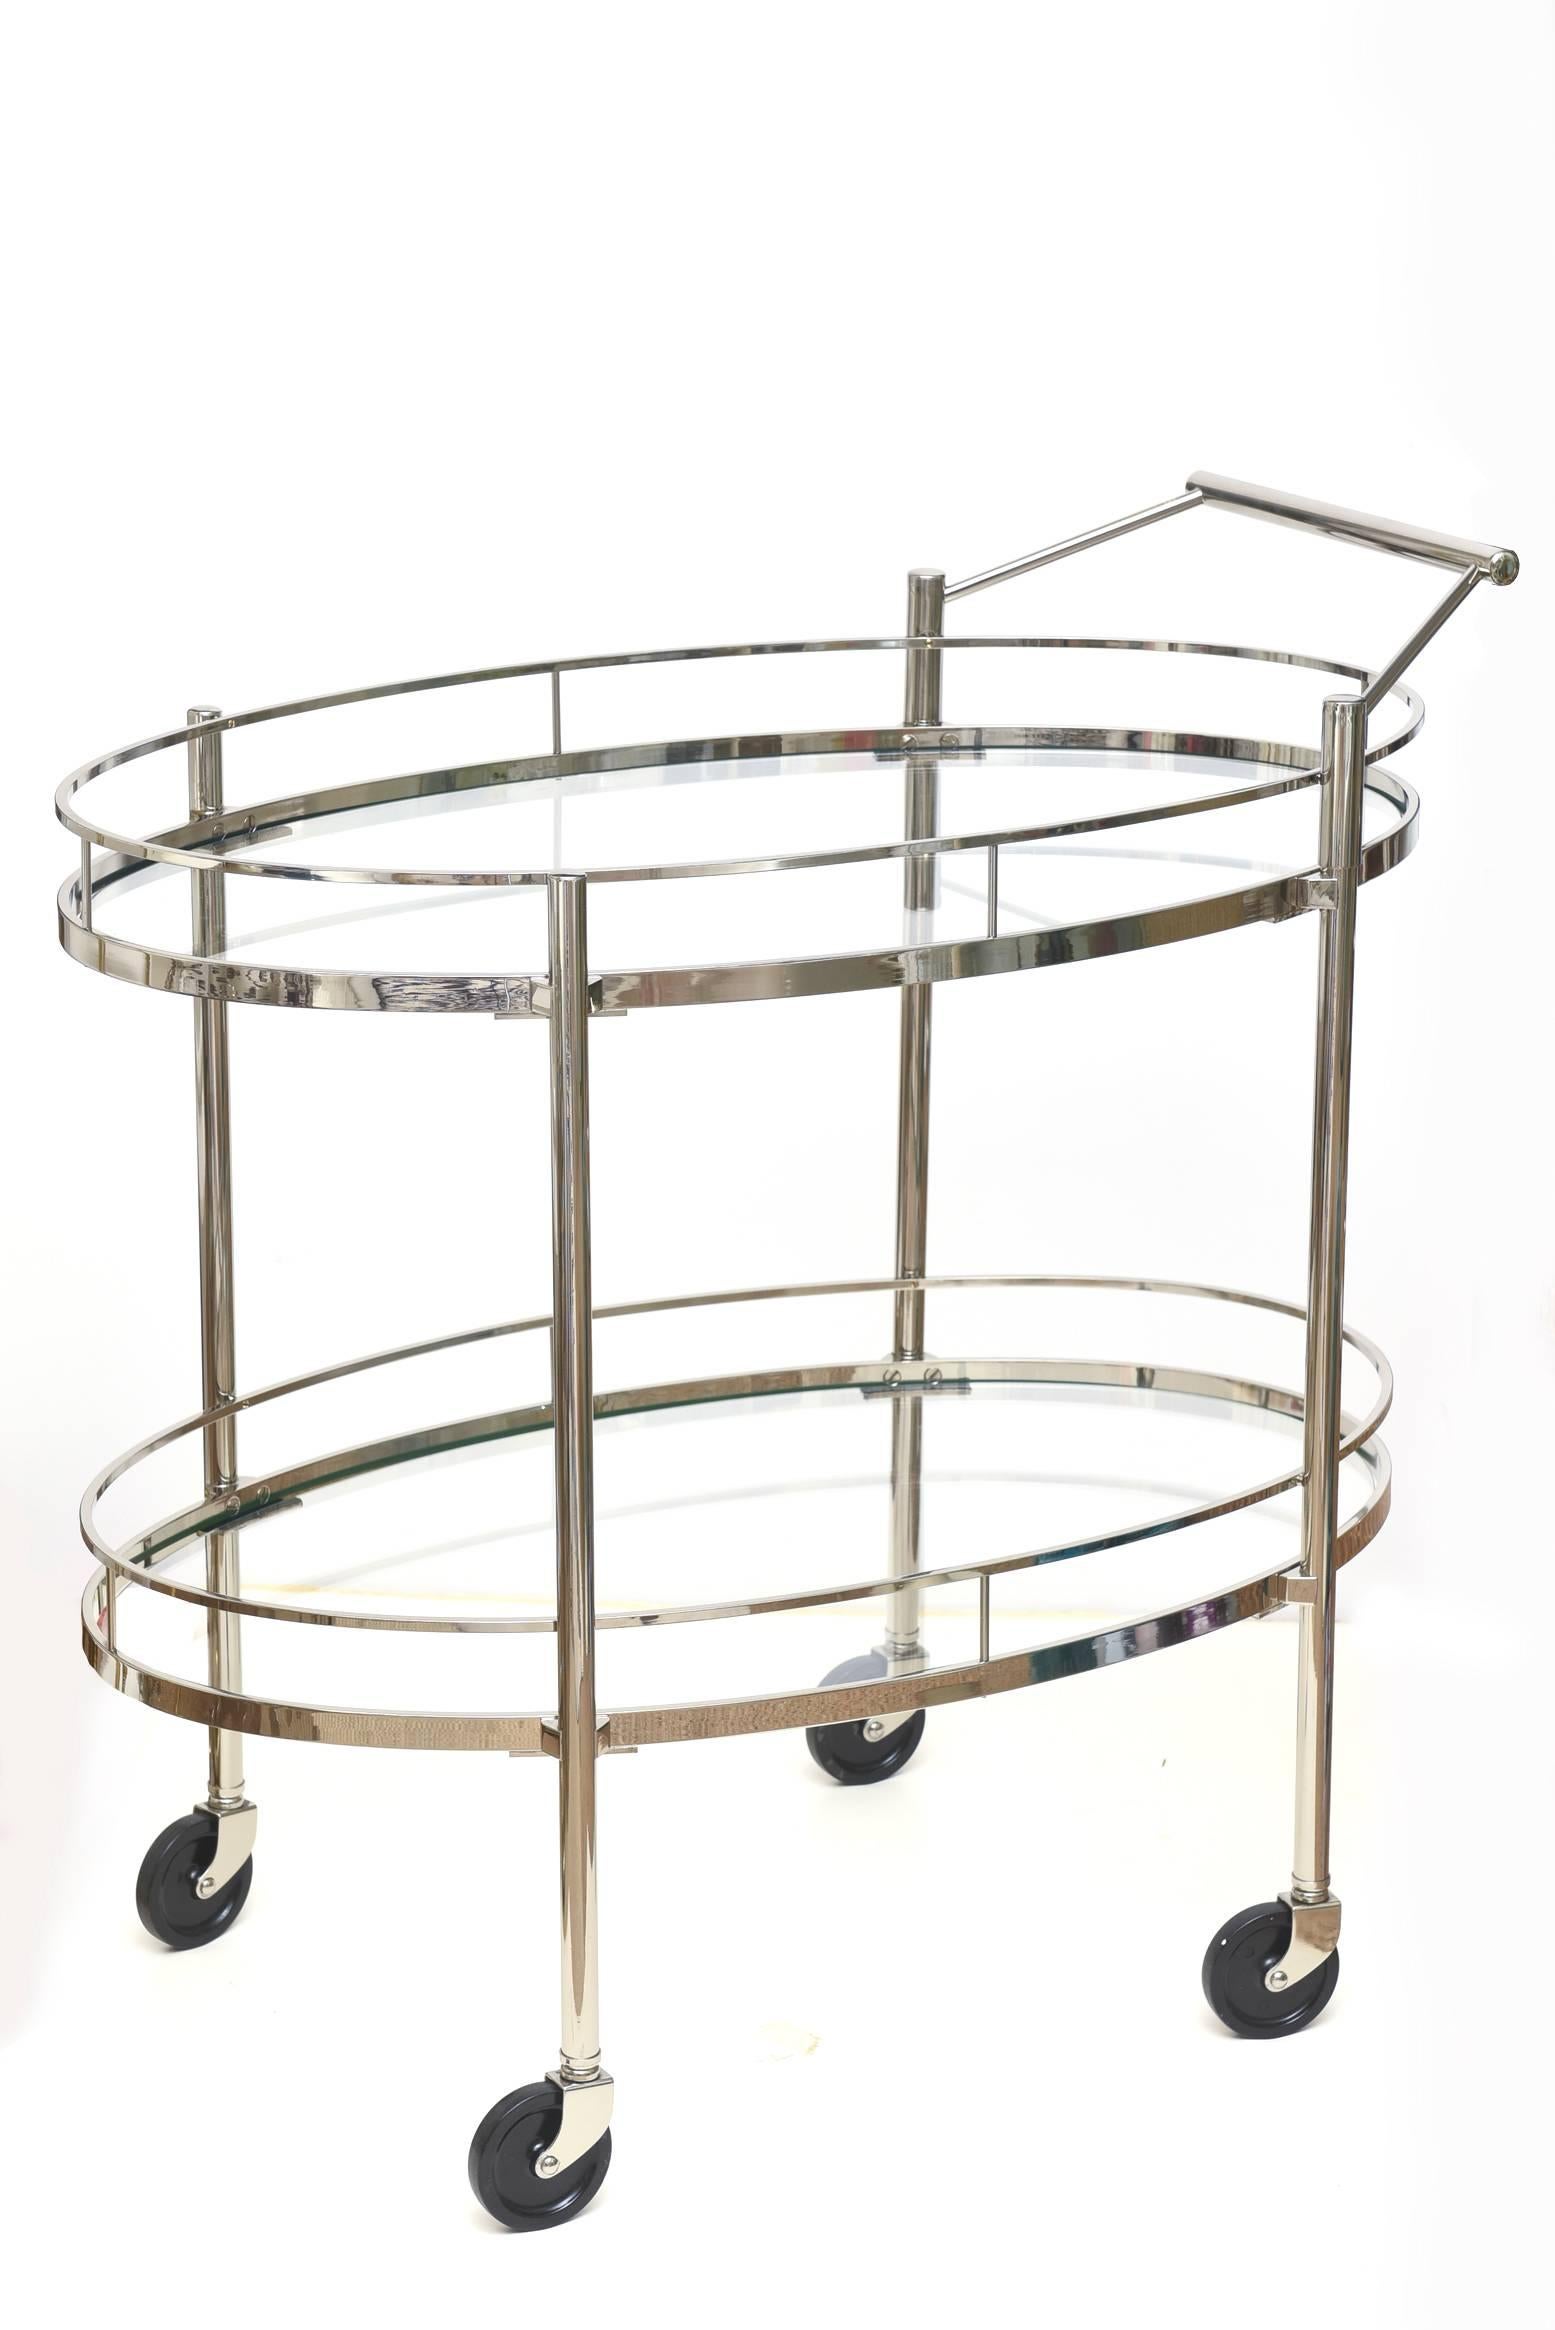 This midcentury oval two-tiered bar cart or trolley signed Maxwell-Phillips NY has been newly restored with nickel silver over brass. The wheels are original to the cart/trolley. The glass has not been replaced. It looks modern yet is from the